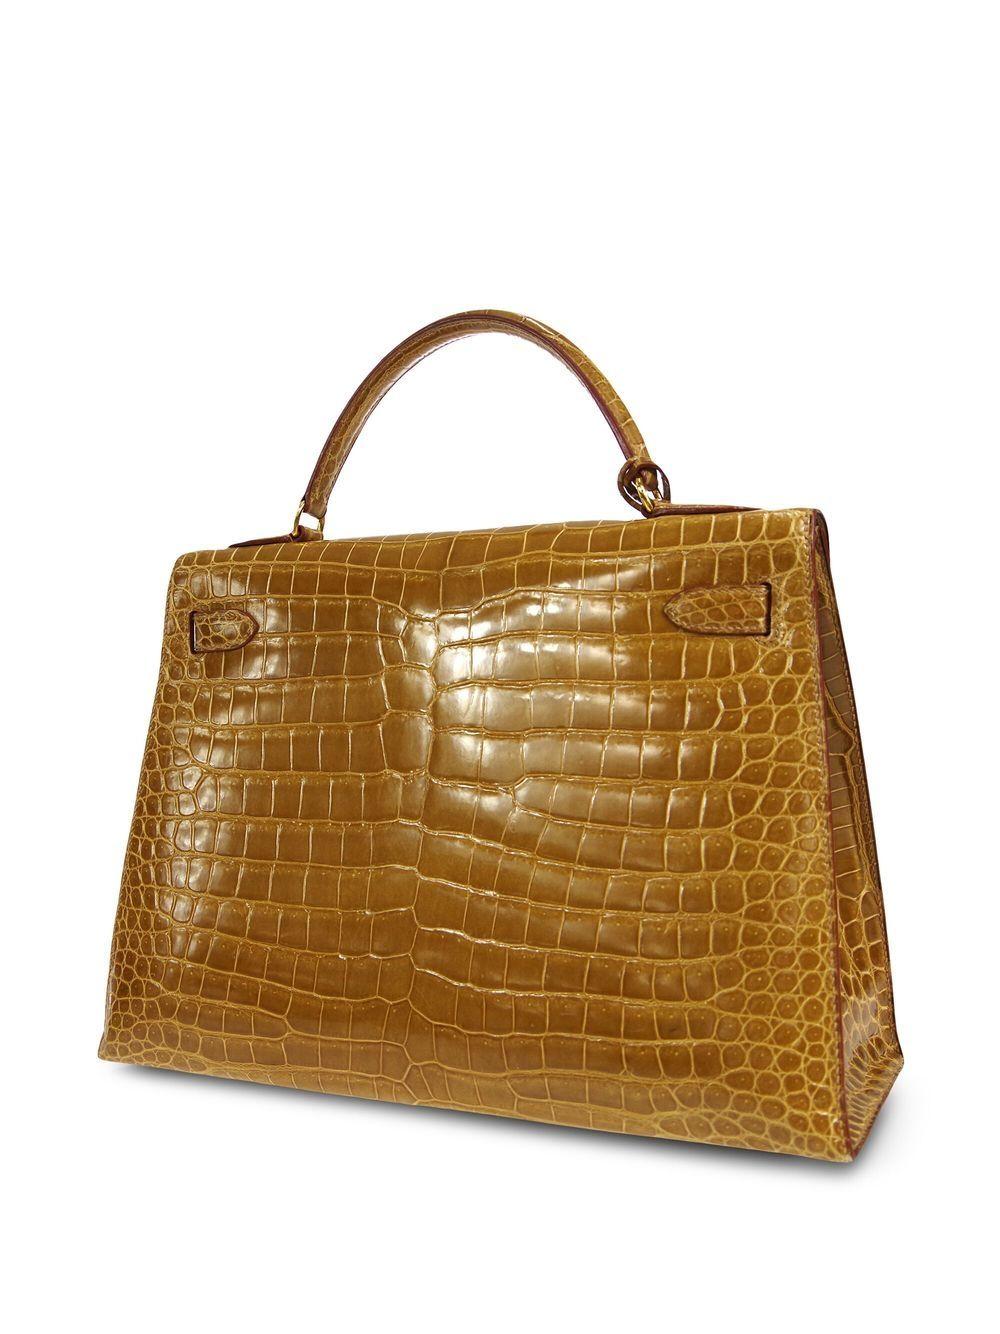 Hermes Kelly 32 Cognac Brown Exotic Crocodile Gold Top Handle Tote Bag In Good Condition For Sale In Chicago, IL